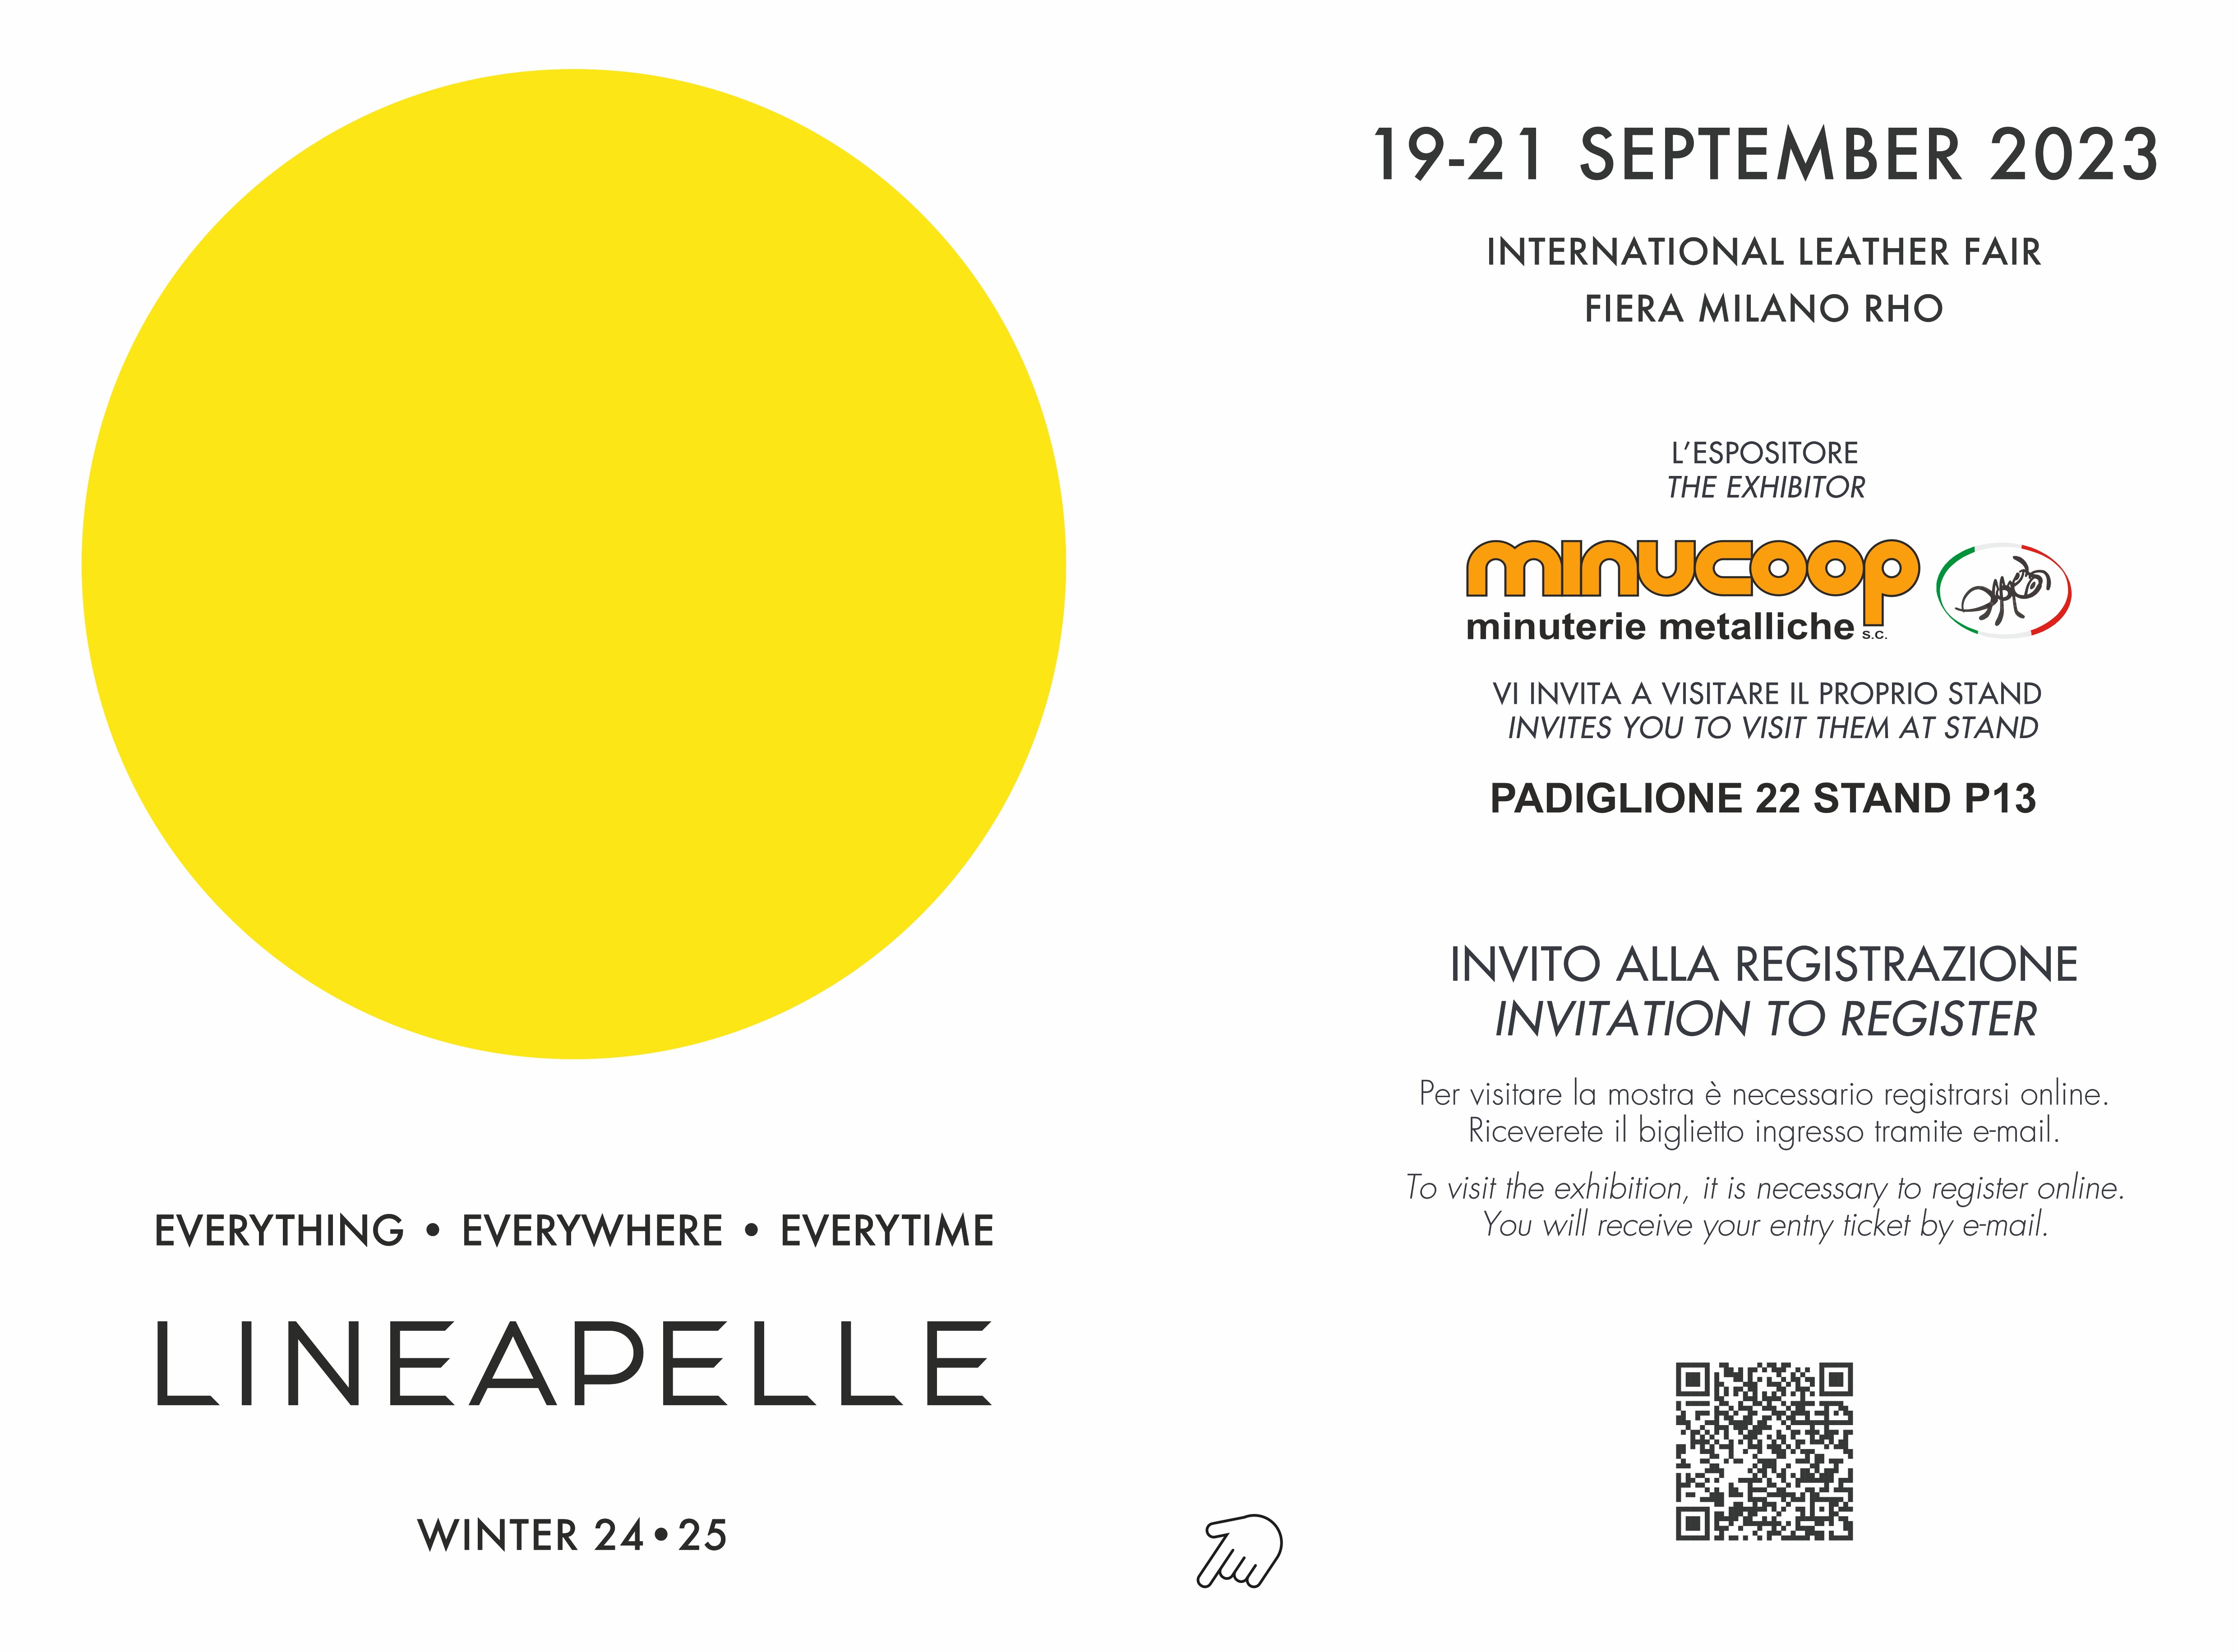 Minucoop s.c. is present at the lineapelle fair september 2023